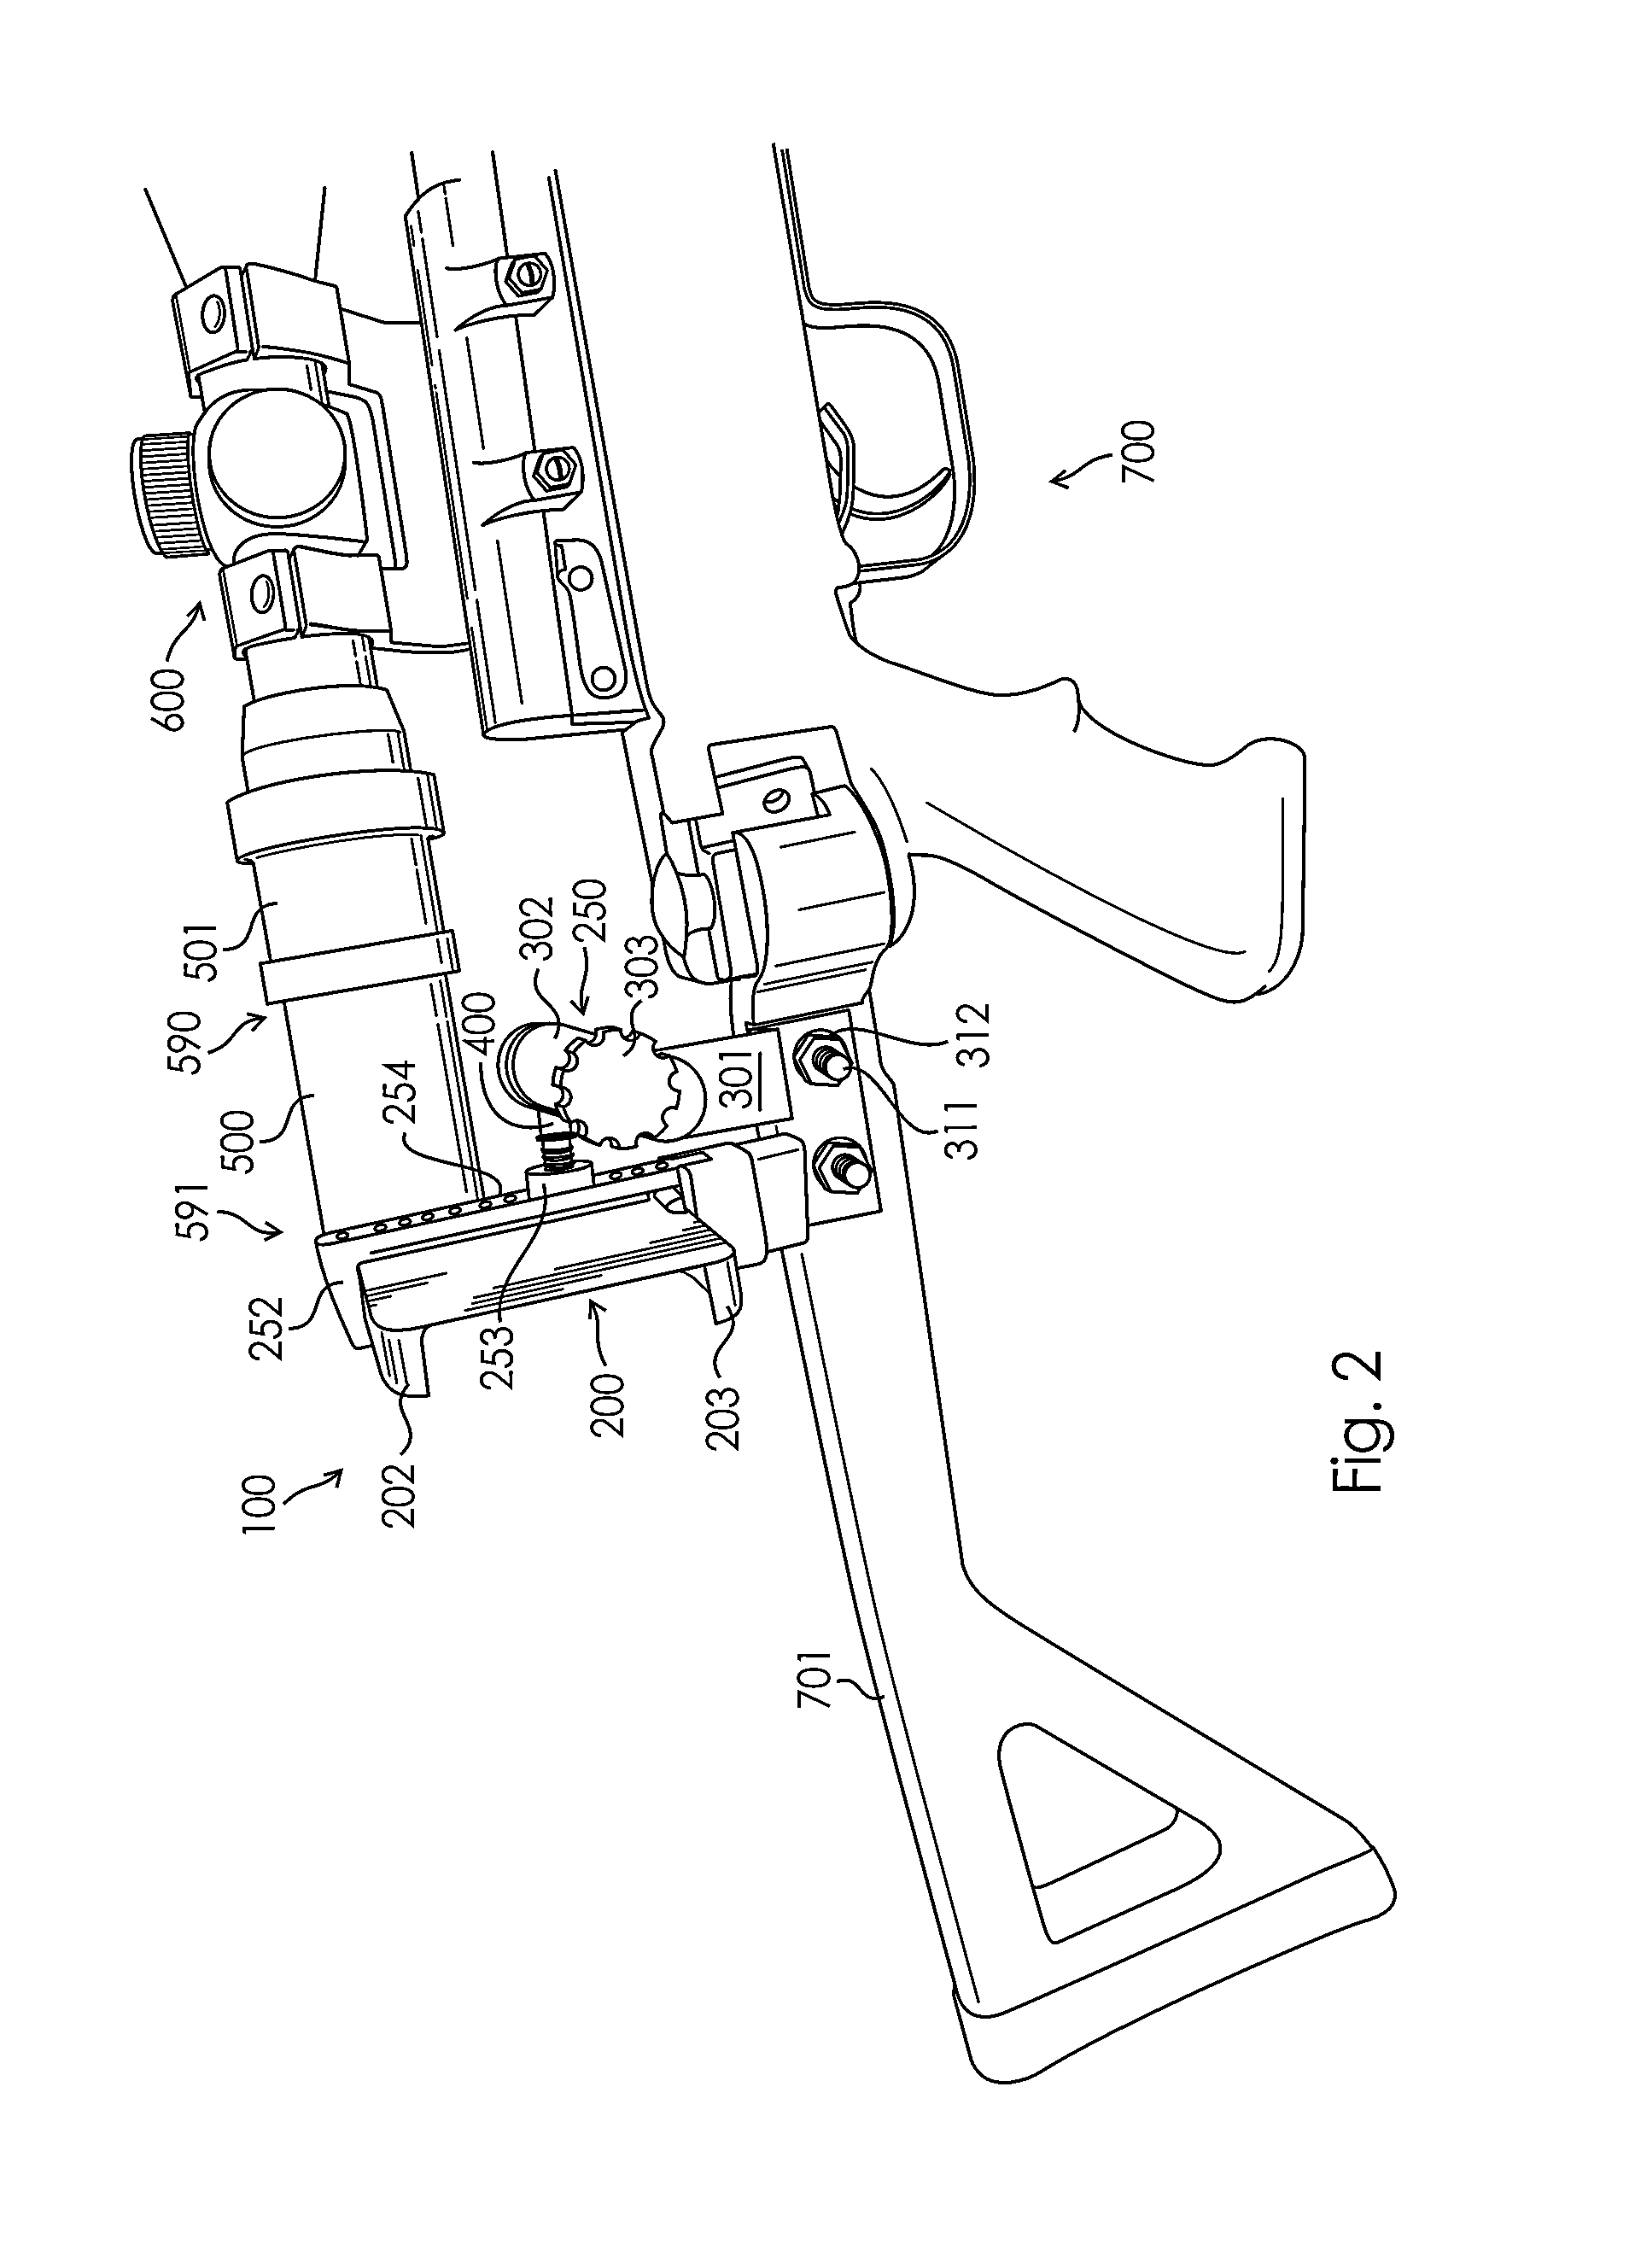 Camera Mount Apparatus and System for a Scope